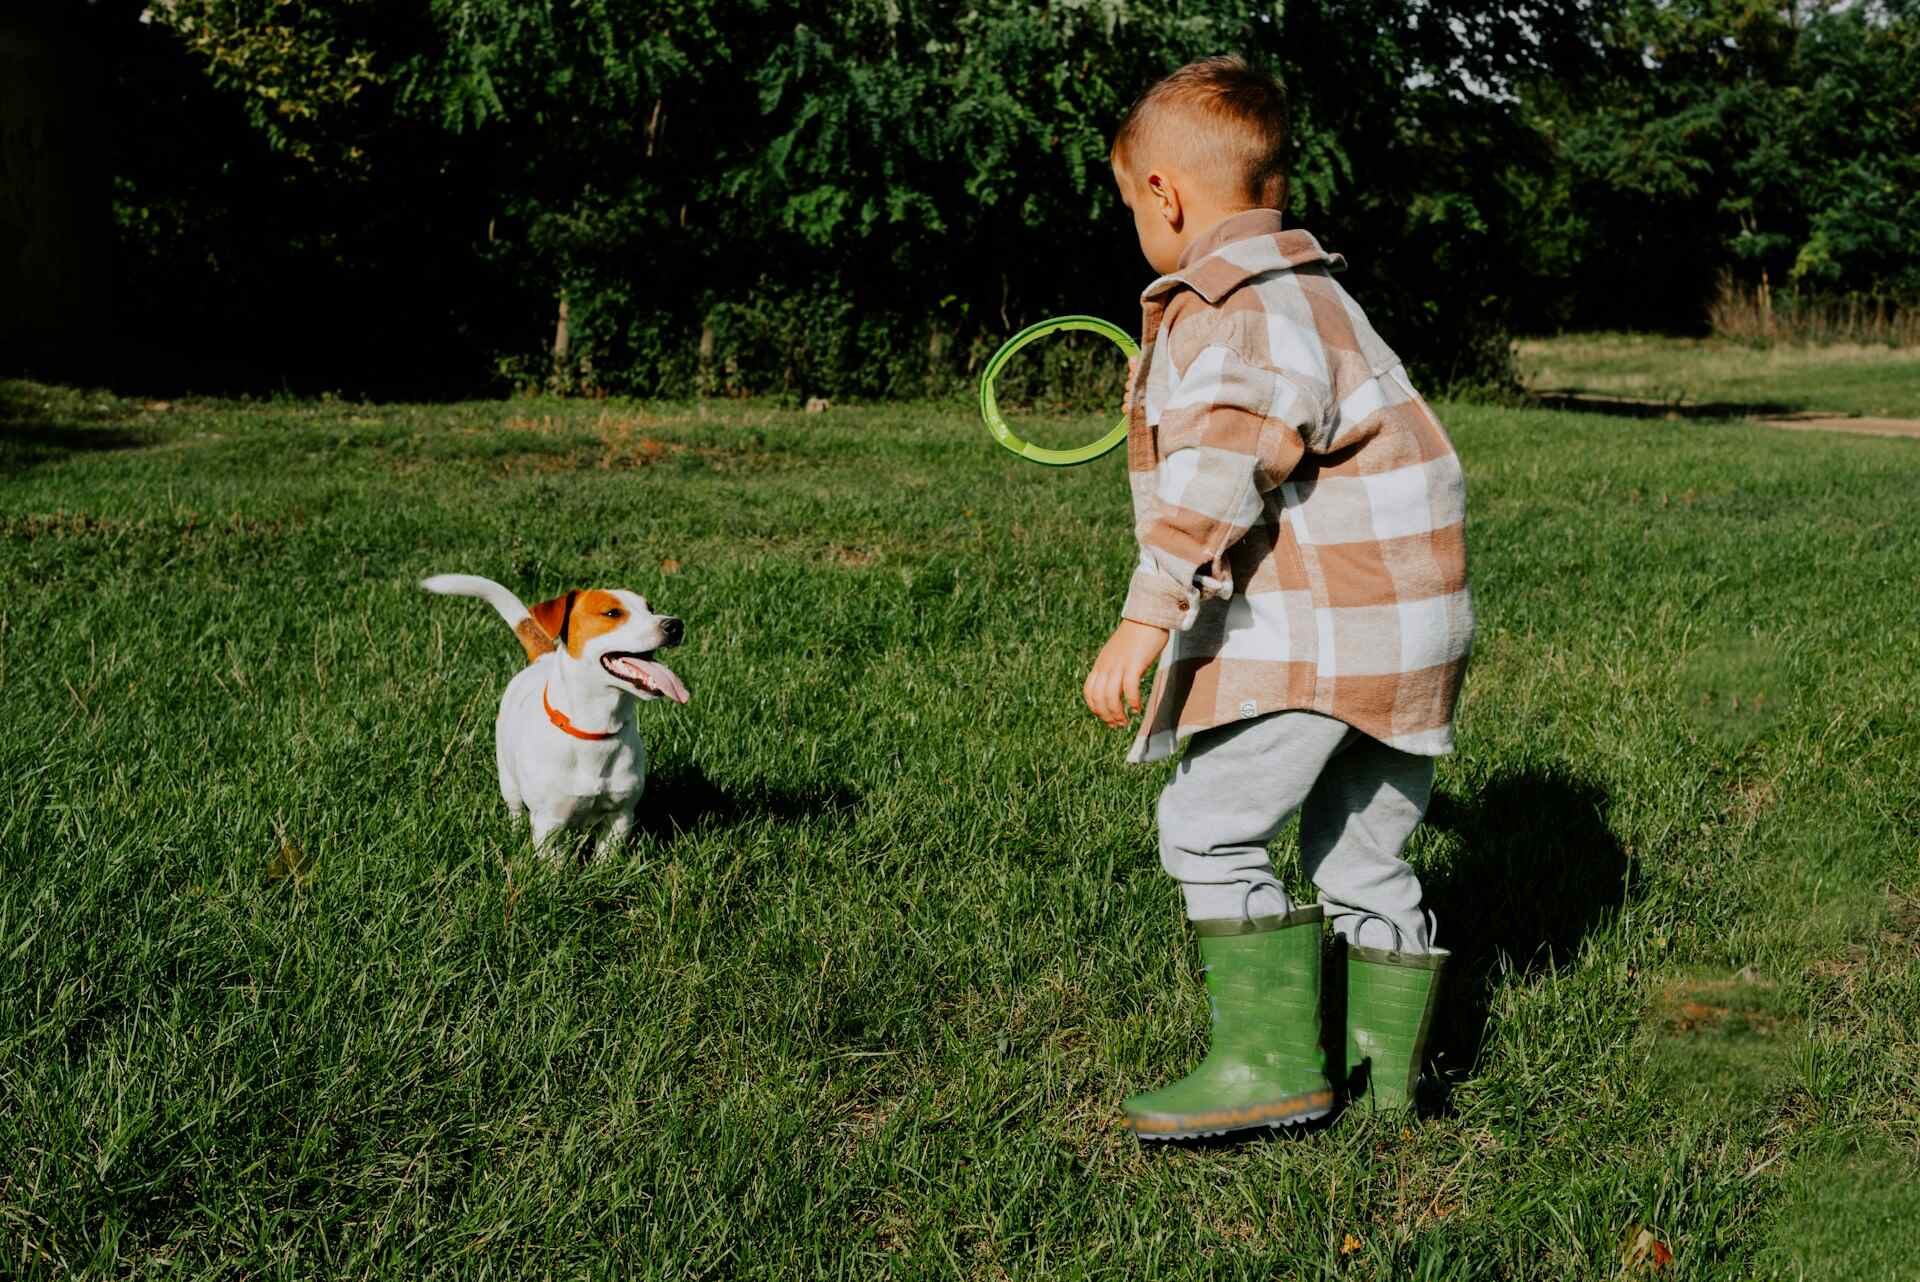 A little boy playing with a Jack Russell terrier in a garden